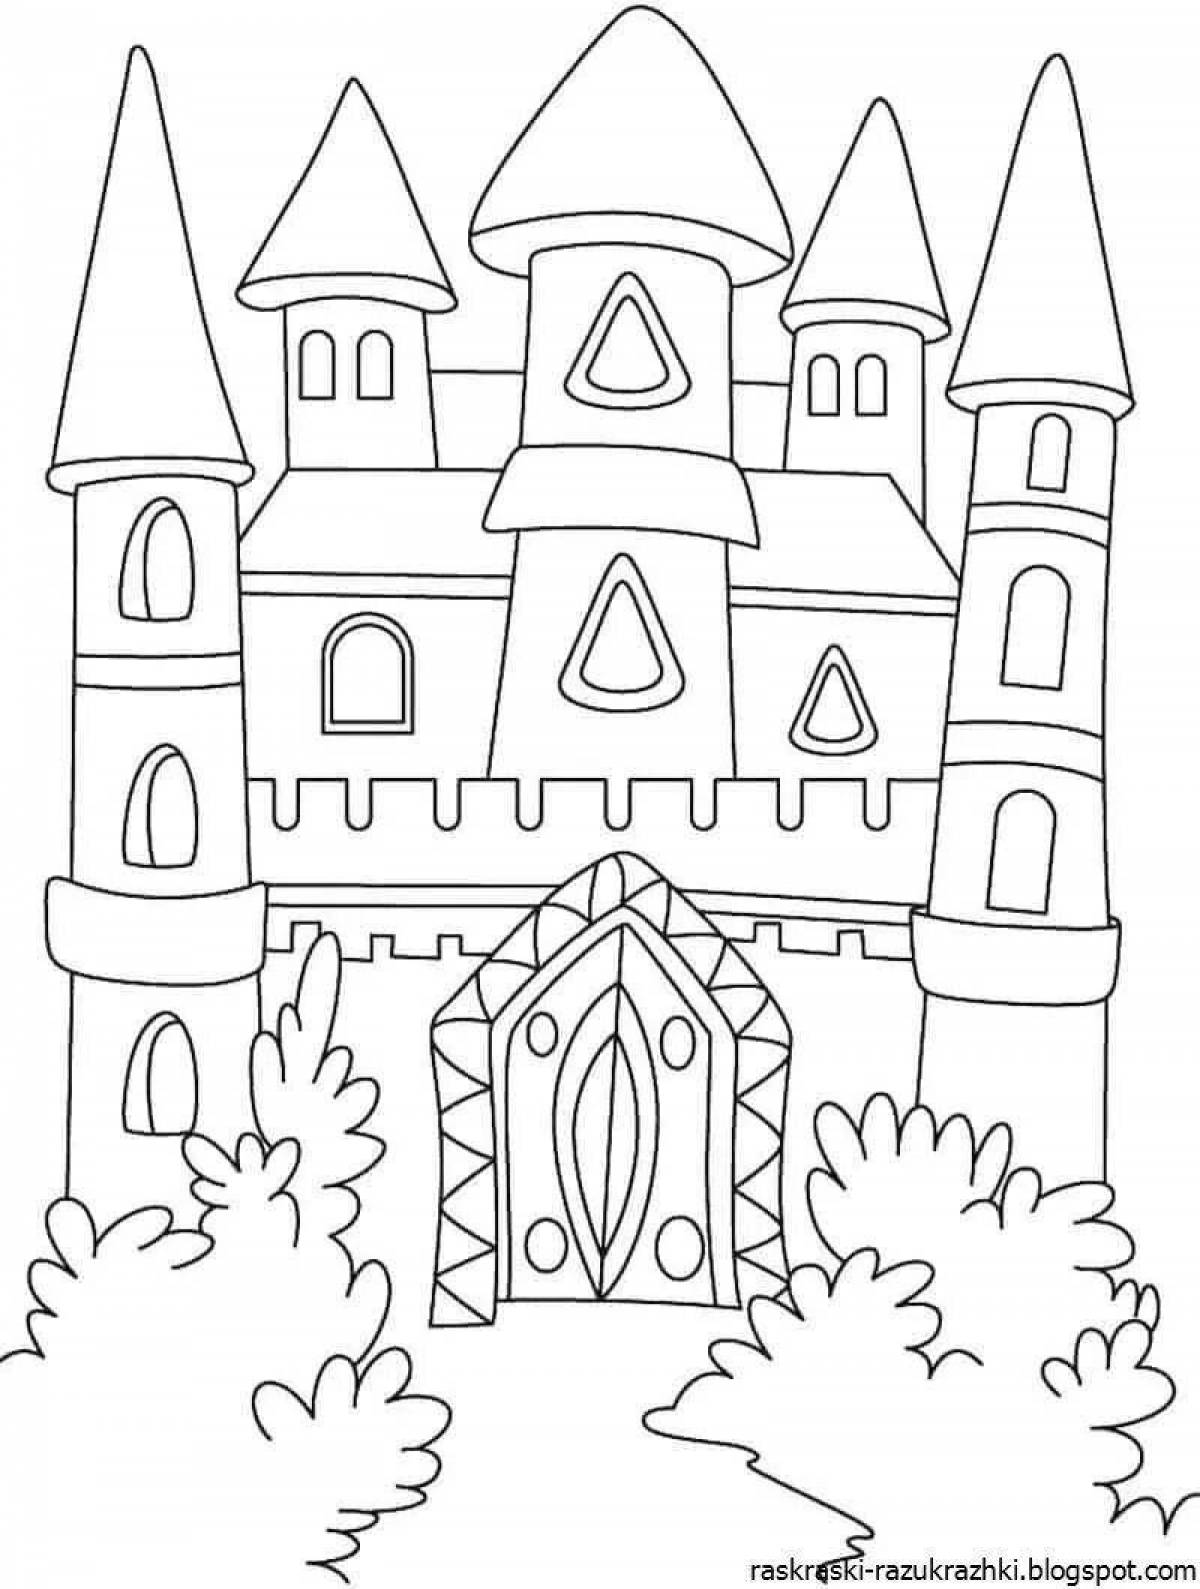 Violent castle coloring book for 4-5 year olds